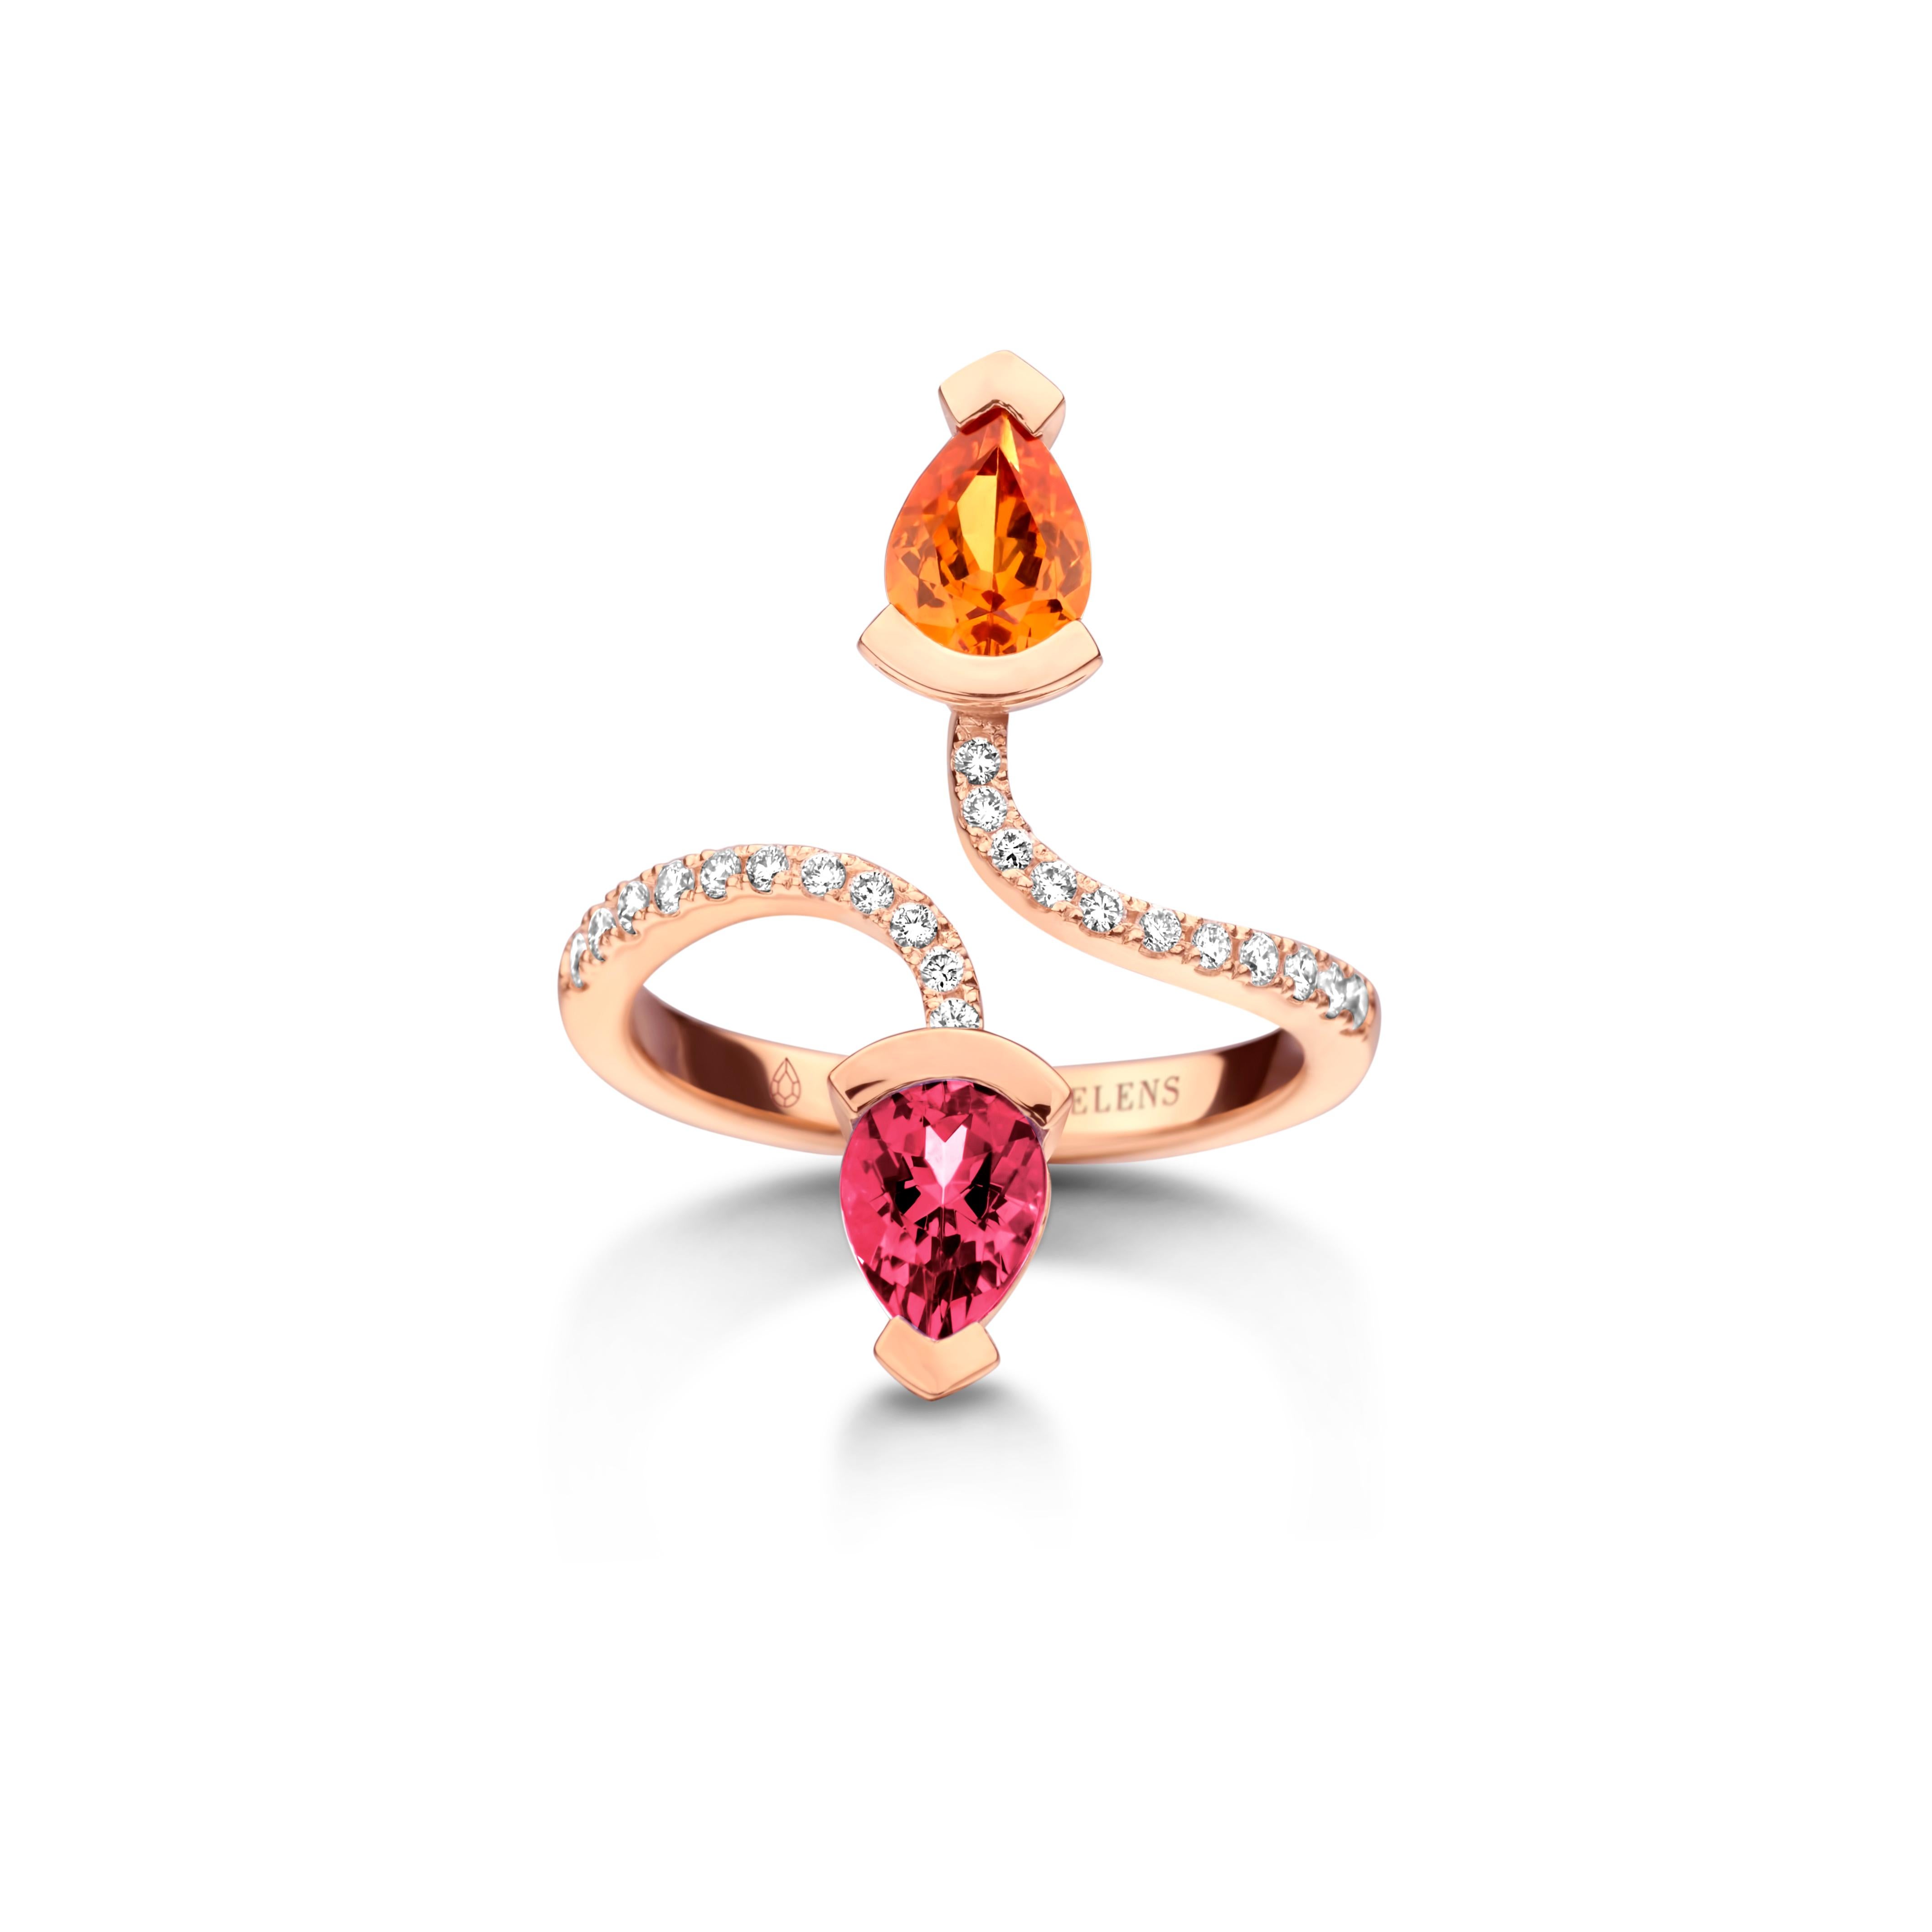 Adeline Duo ring in 18Kt white gold 5g set with a pear-shaped mandarin garnet 0,70 Ct, a pear-shaped Rubellite 0,70 Ct and 0,19 Ct of white brilliant cut diamonds - VS F quality. Celine Roelens, a goldsmith and gemologist, is specialized in unique,